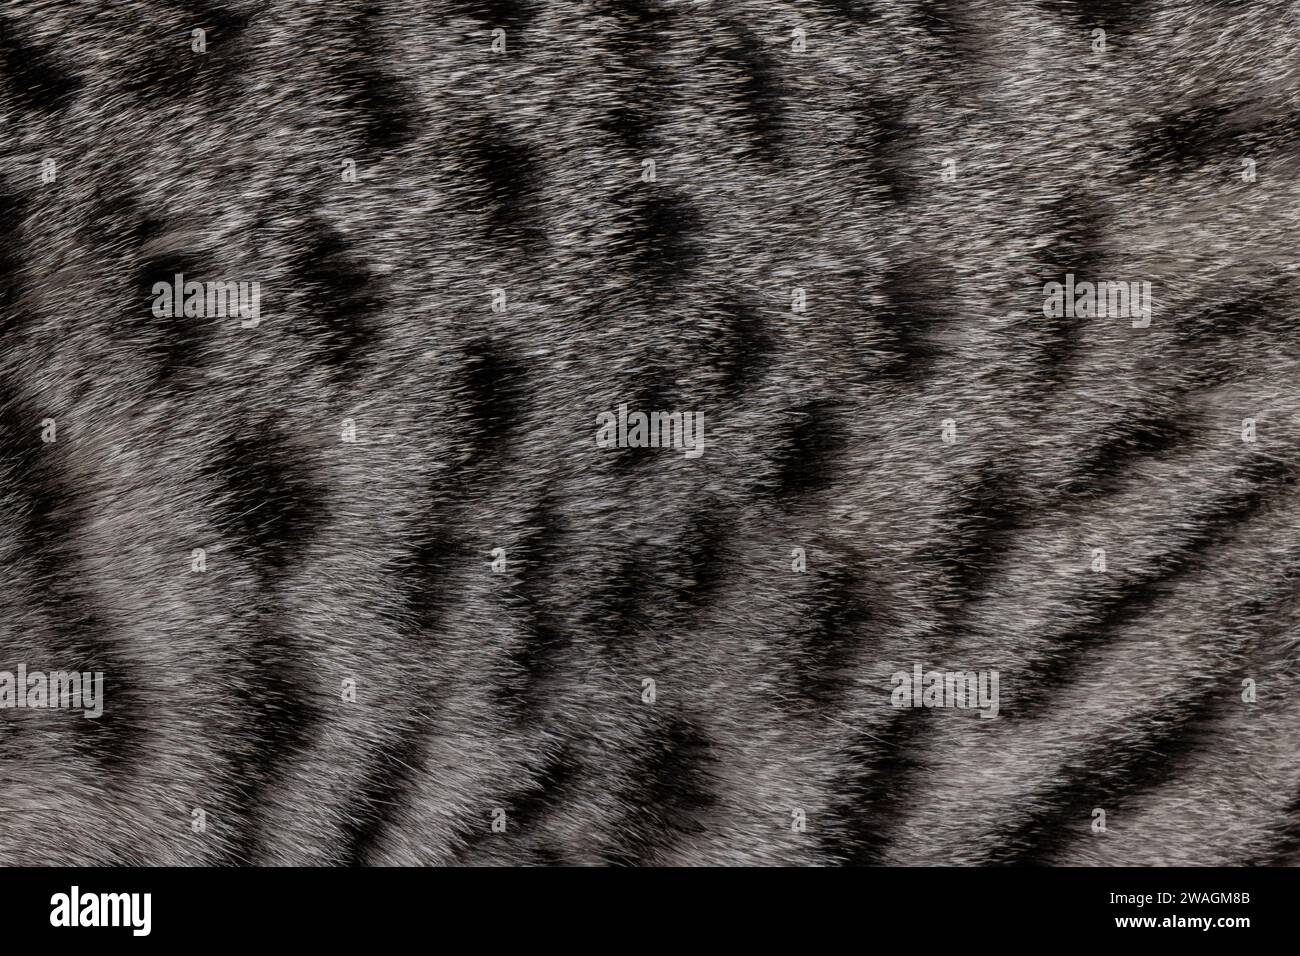 Full frame macro detailed  image of dark silver with black spotted domestic Savannah cat fur. Stock Photo